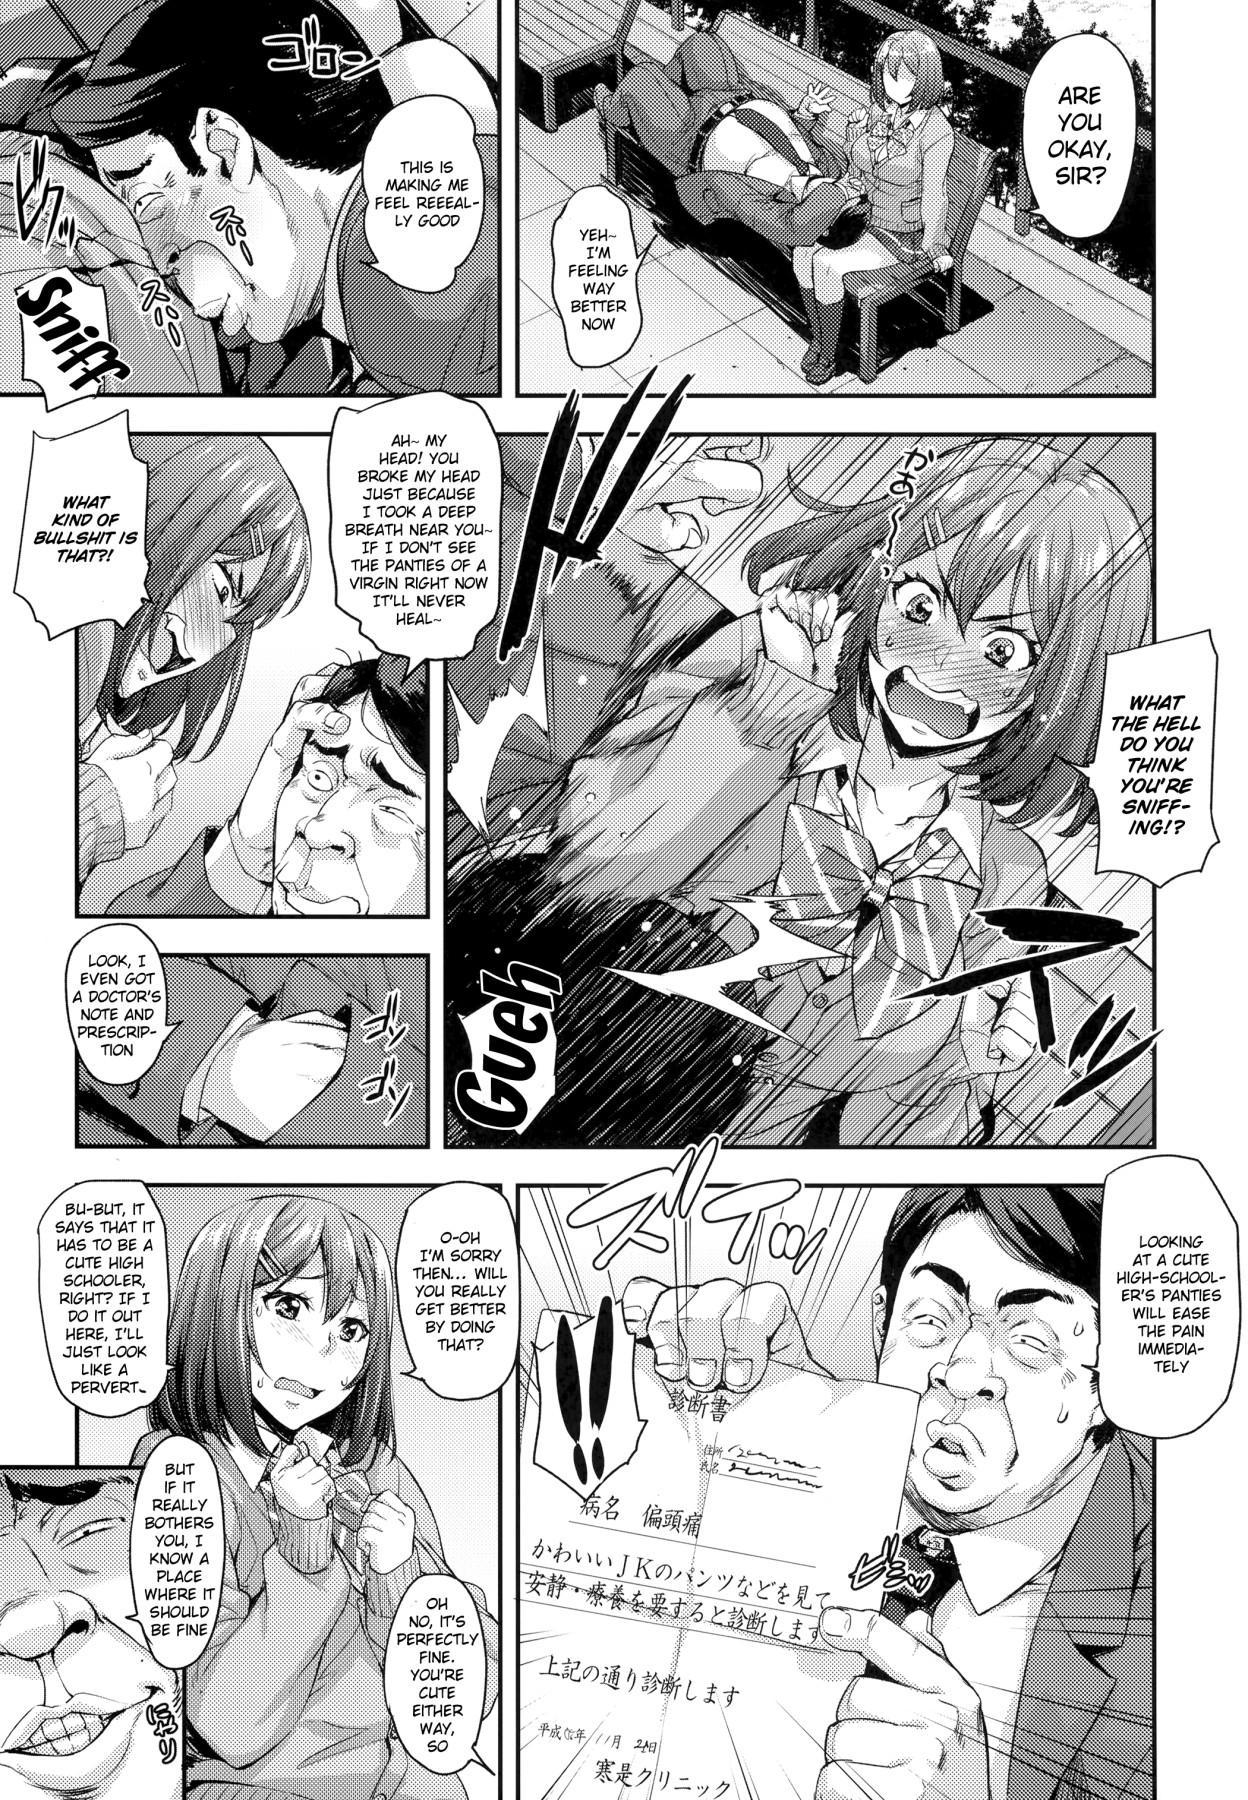 Class Shibaranakute mo yokunai? | Is It Bad To Not Get Tied Up? - Original Gay Orgy - Page 6